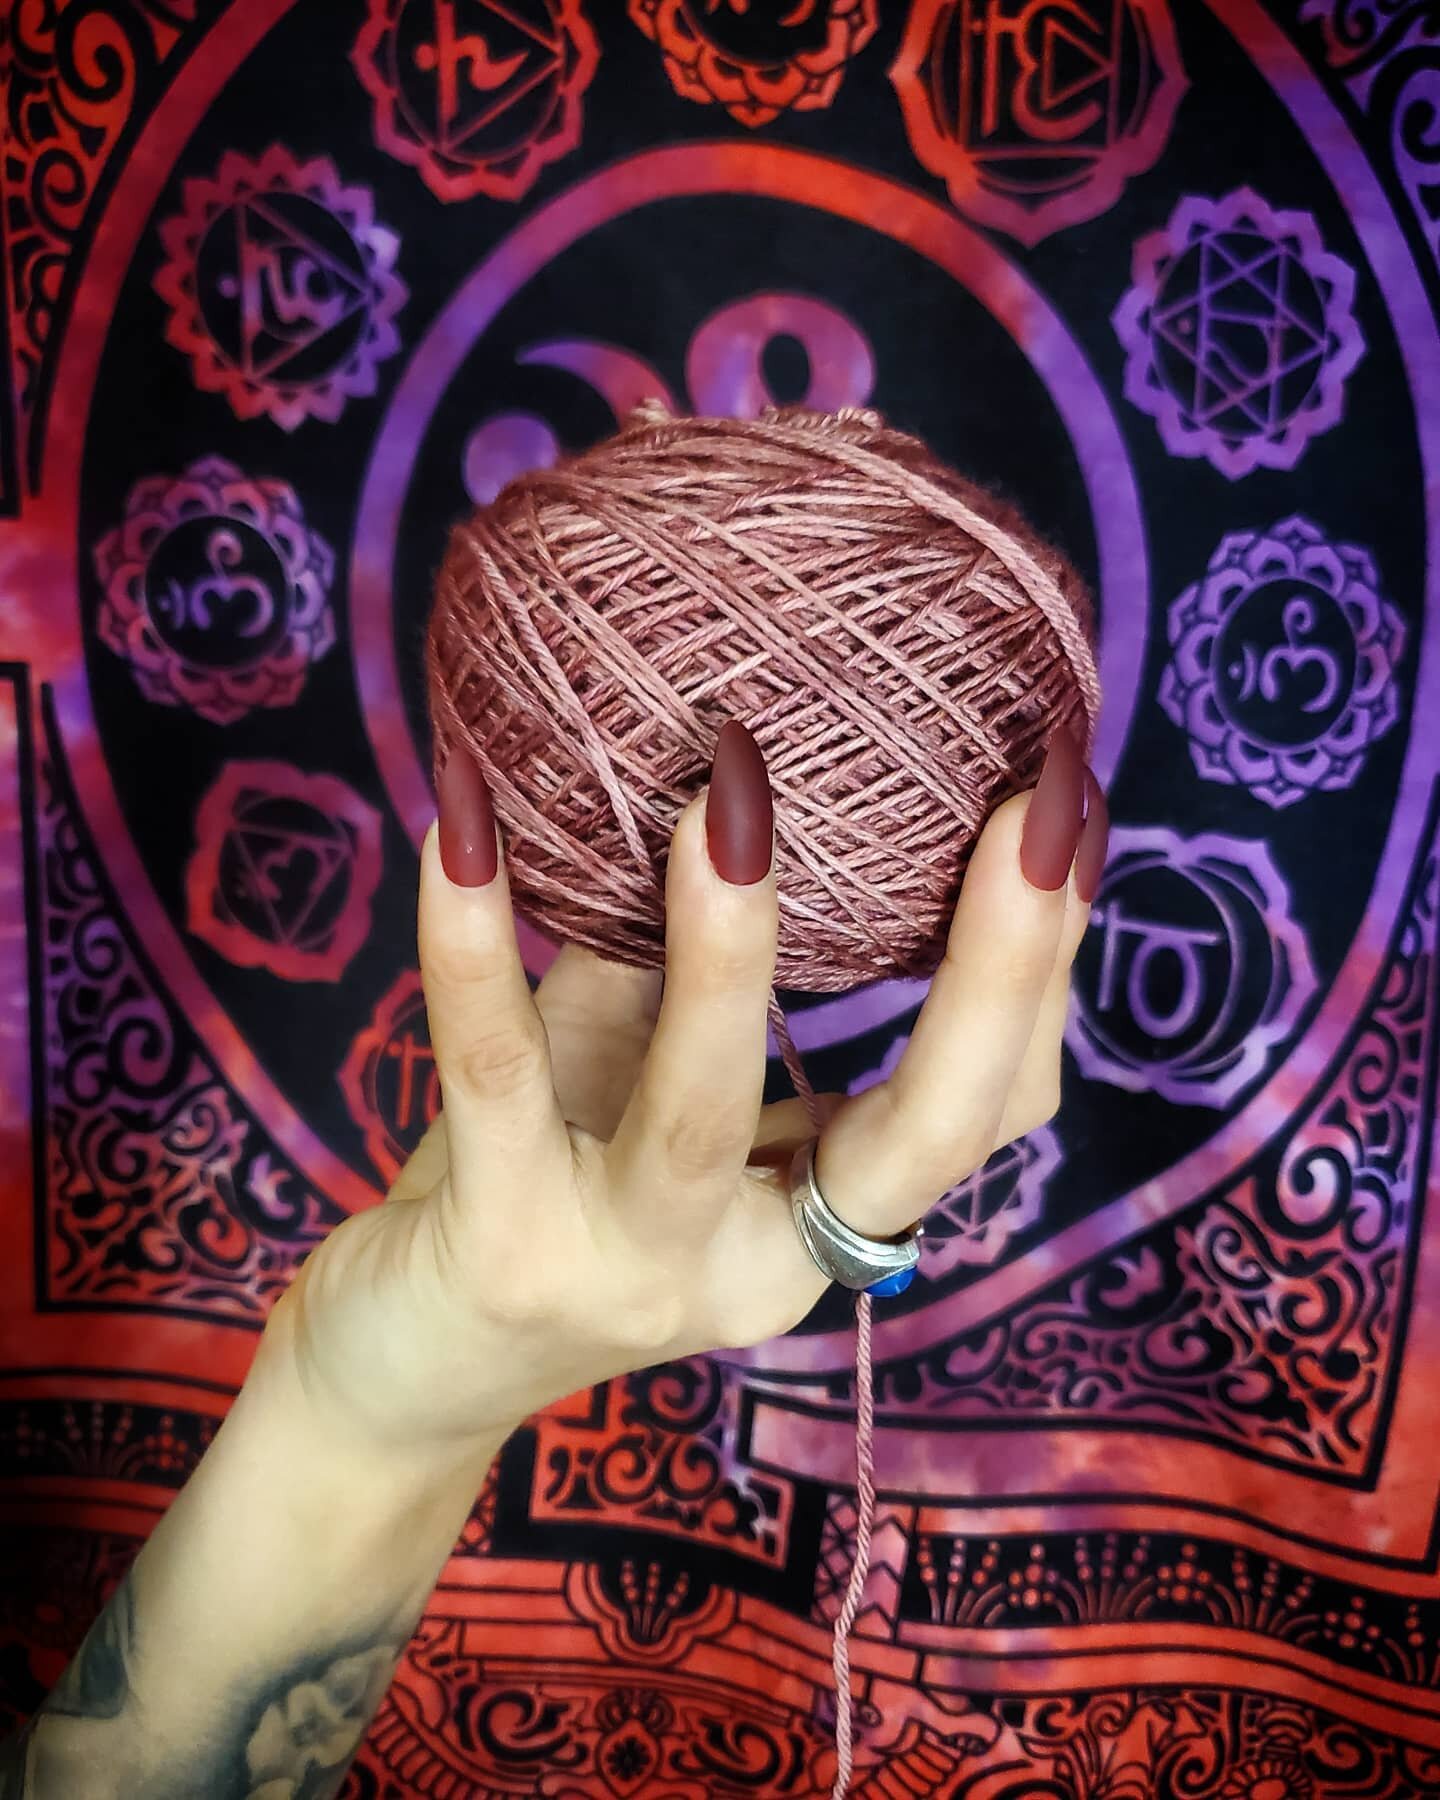 When that yarn matches your nails from @staticnailsofficial perfectly.

#TheWeavingWitch #crochetersofinstagram #crocheting #crocheter #crochet #yarnwitch #makerlife #etsyshop #etsy #witchery #witchyvibes #witchesofinstagram #mooncycle #yarnlove #yar